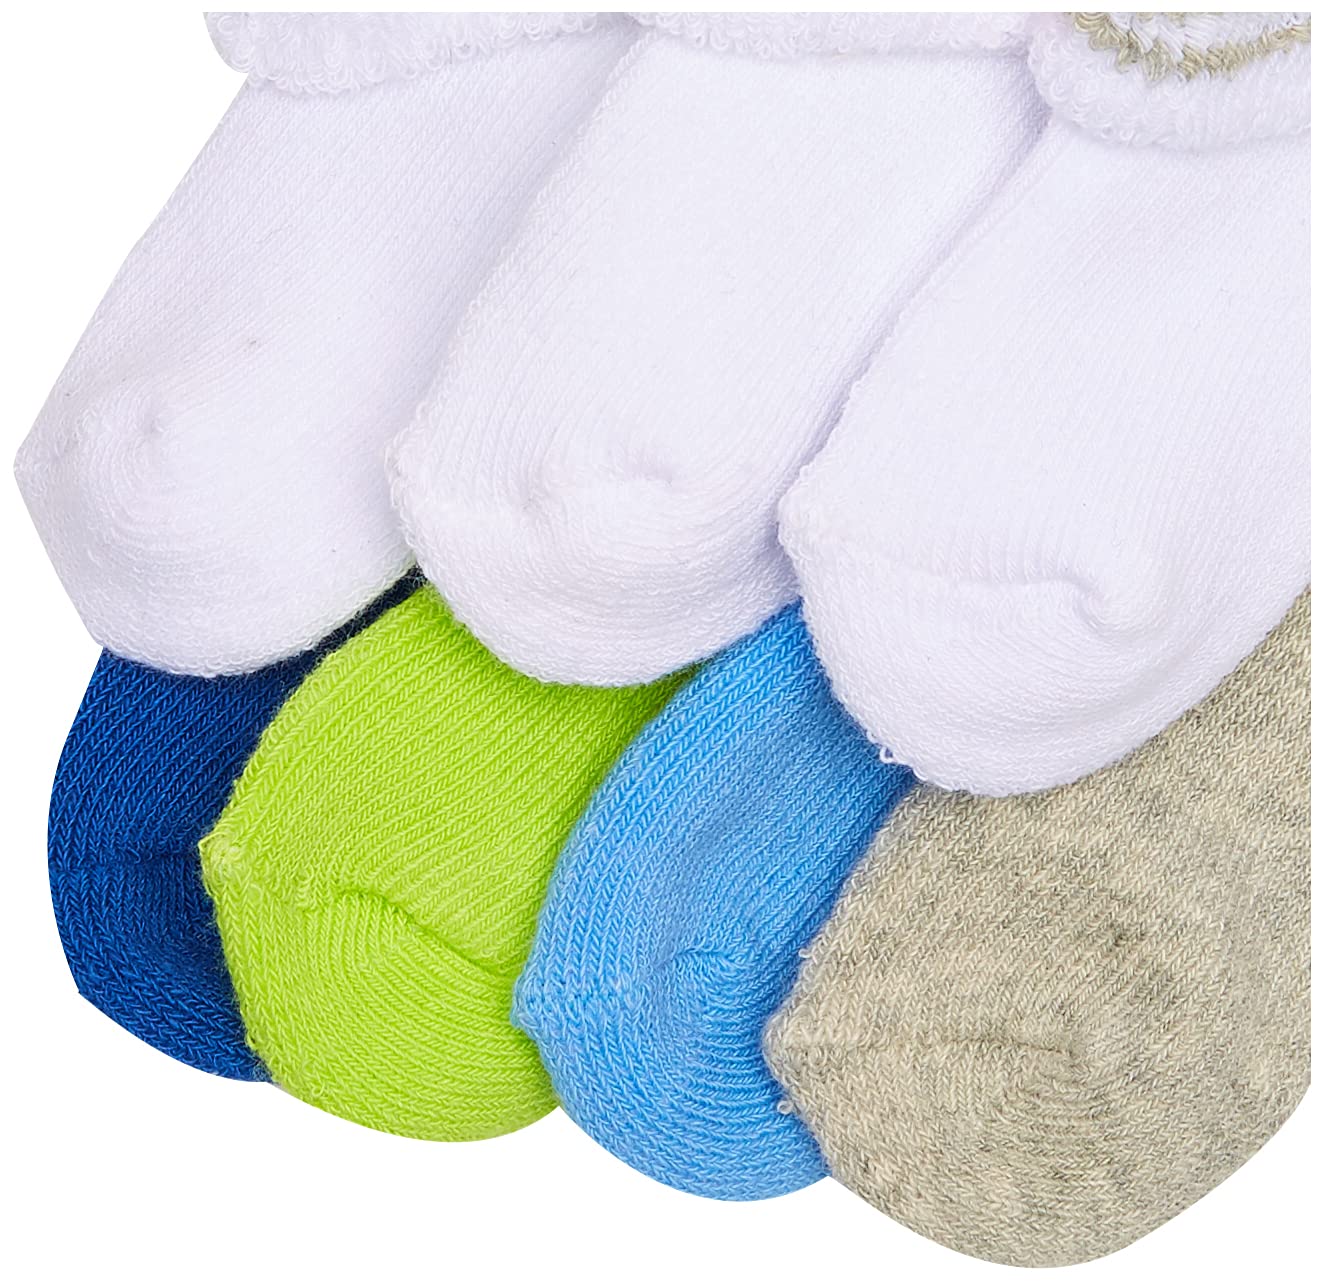 Luvable Friends Unisex Baby Newborn and Baby Terry Socks